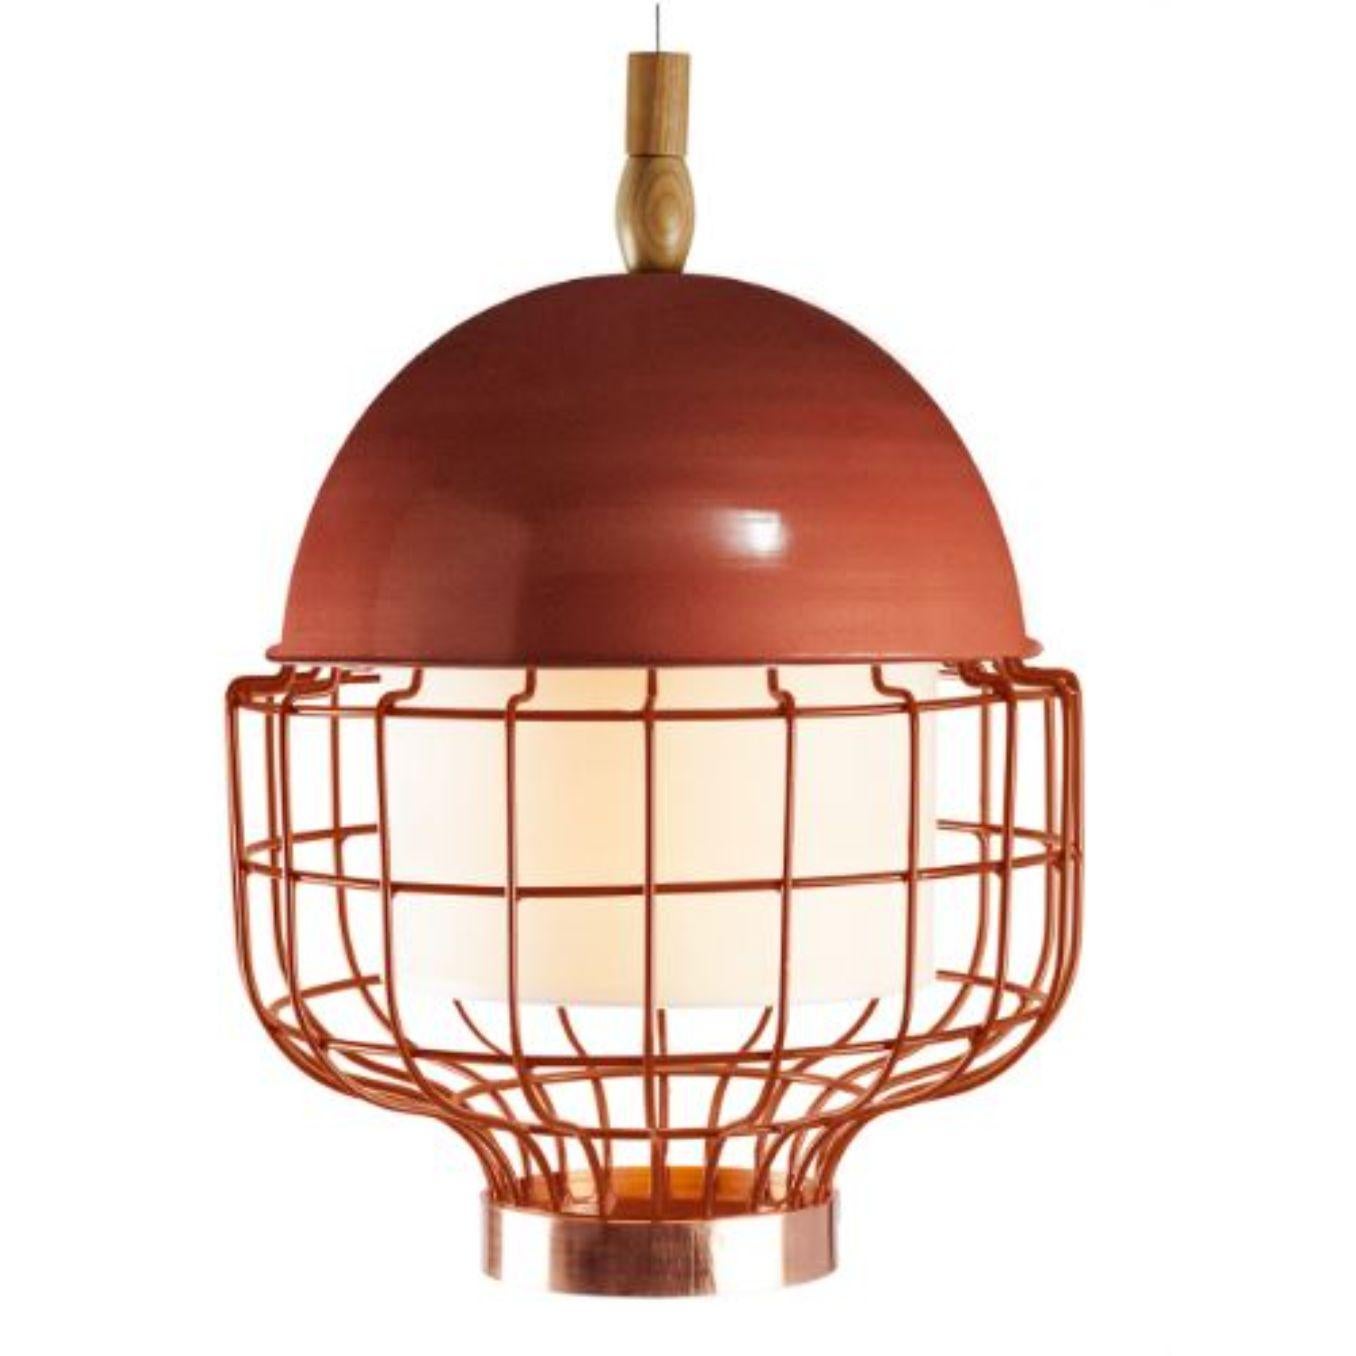 Copper Magnolia III suspension lamp with copper ring by Dooq
Dimensions: W 31 x D 31 x H 42 cm
Materials: lacquered metal, polished or brushed metal, copper.
abat-jour: cotton
Also available in different colours and